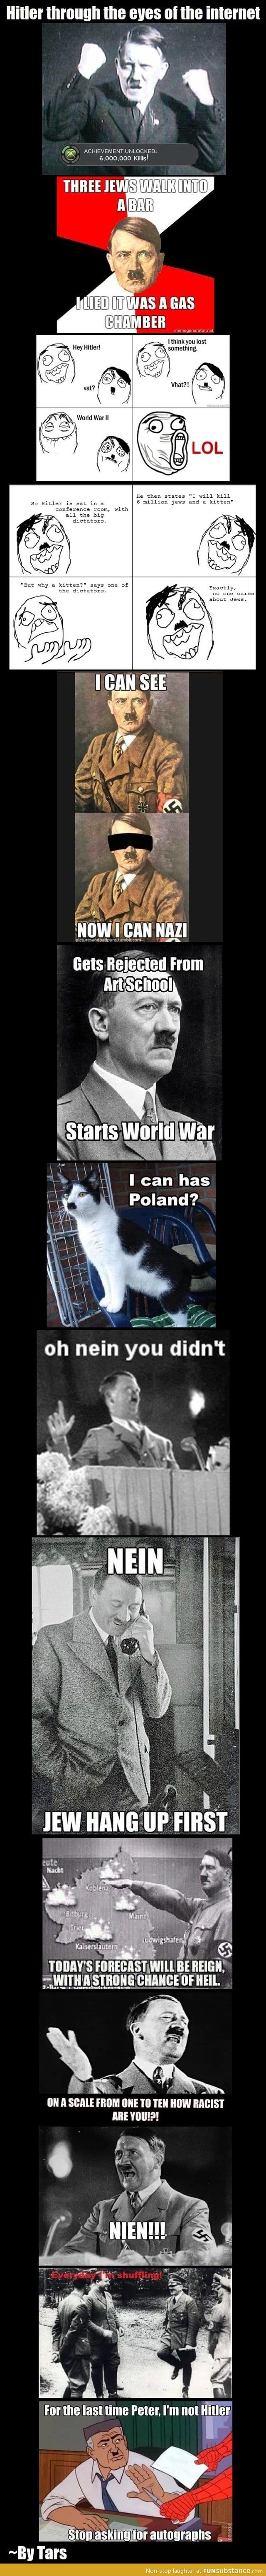 Hitler seen by internetters